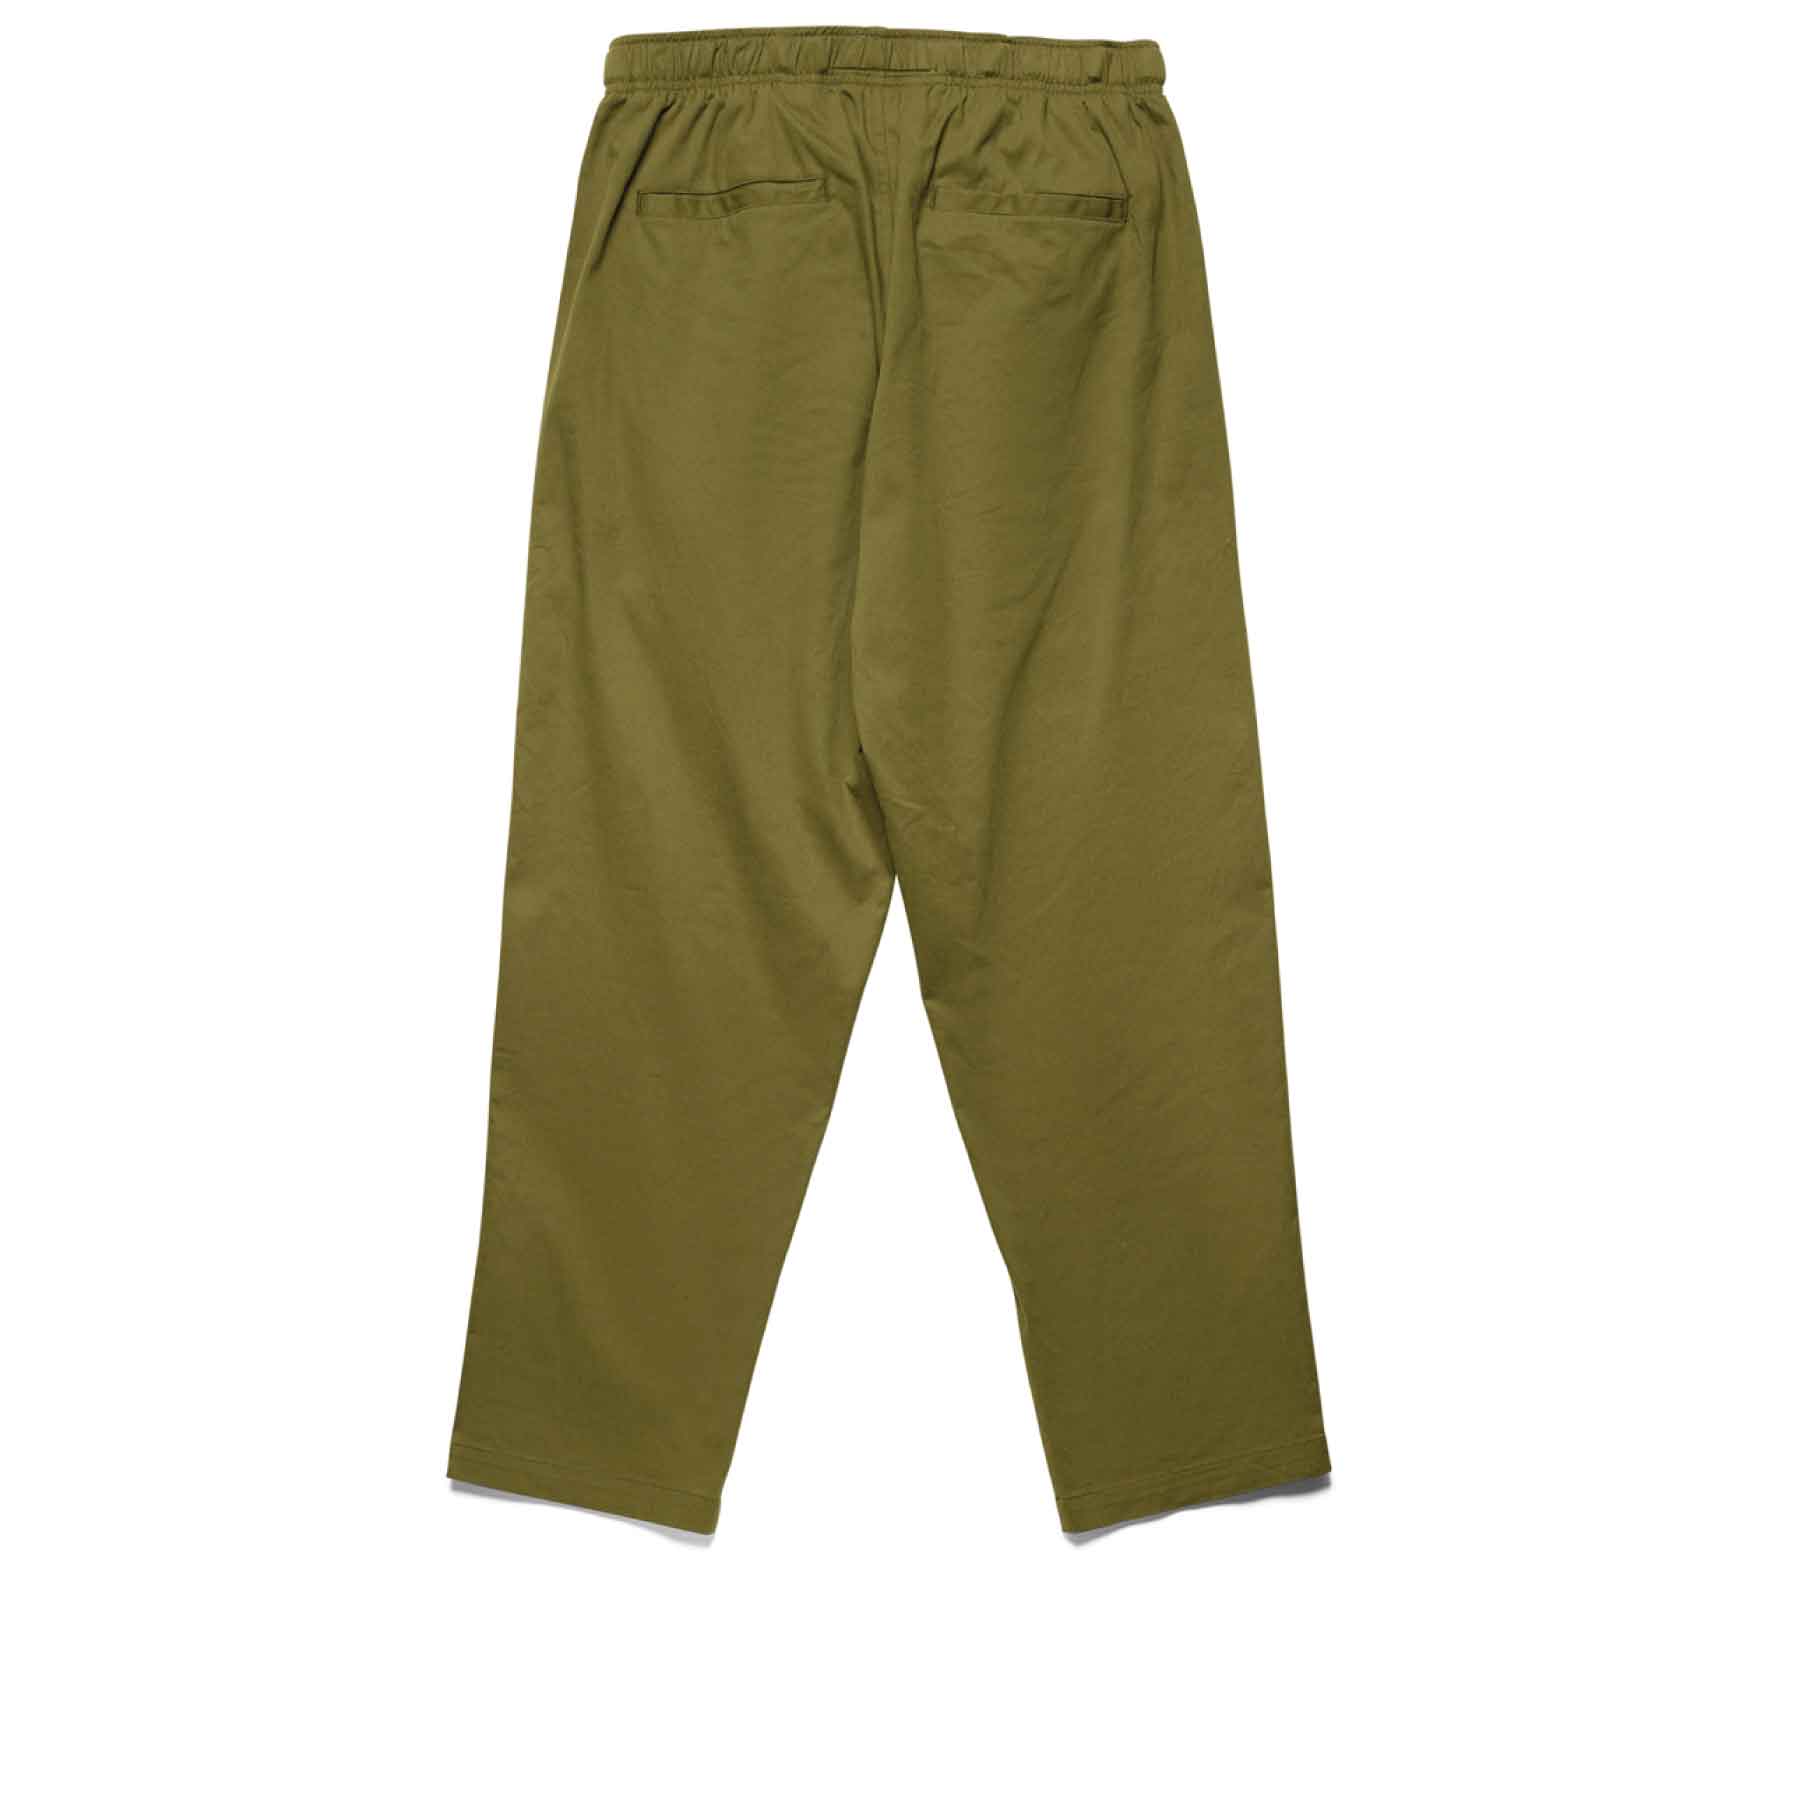 Chiller Pant Olive Twill